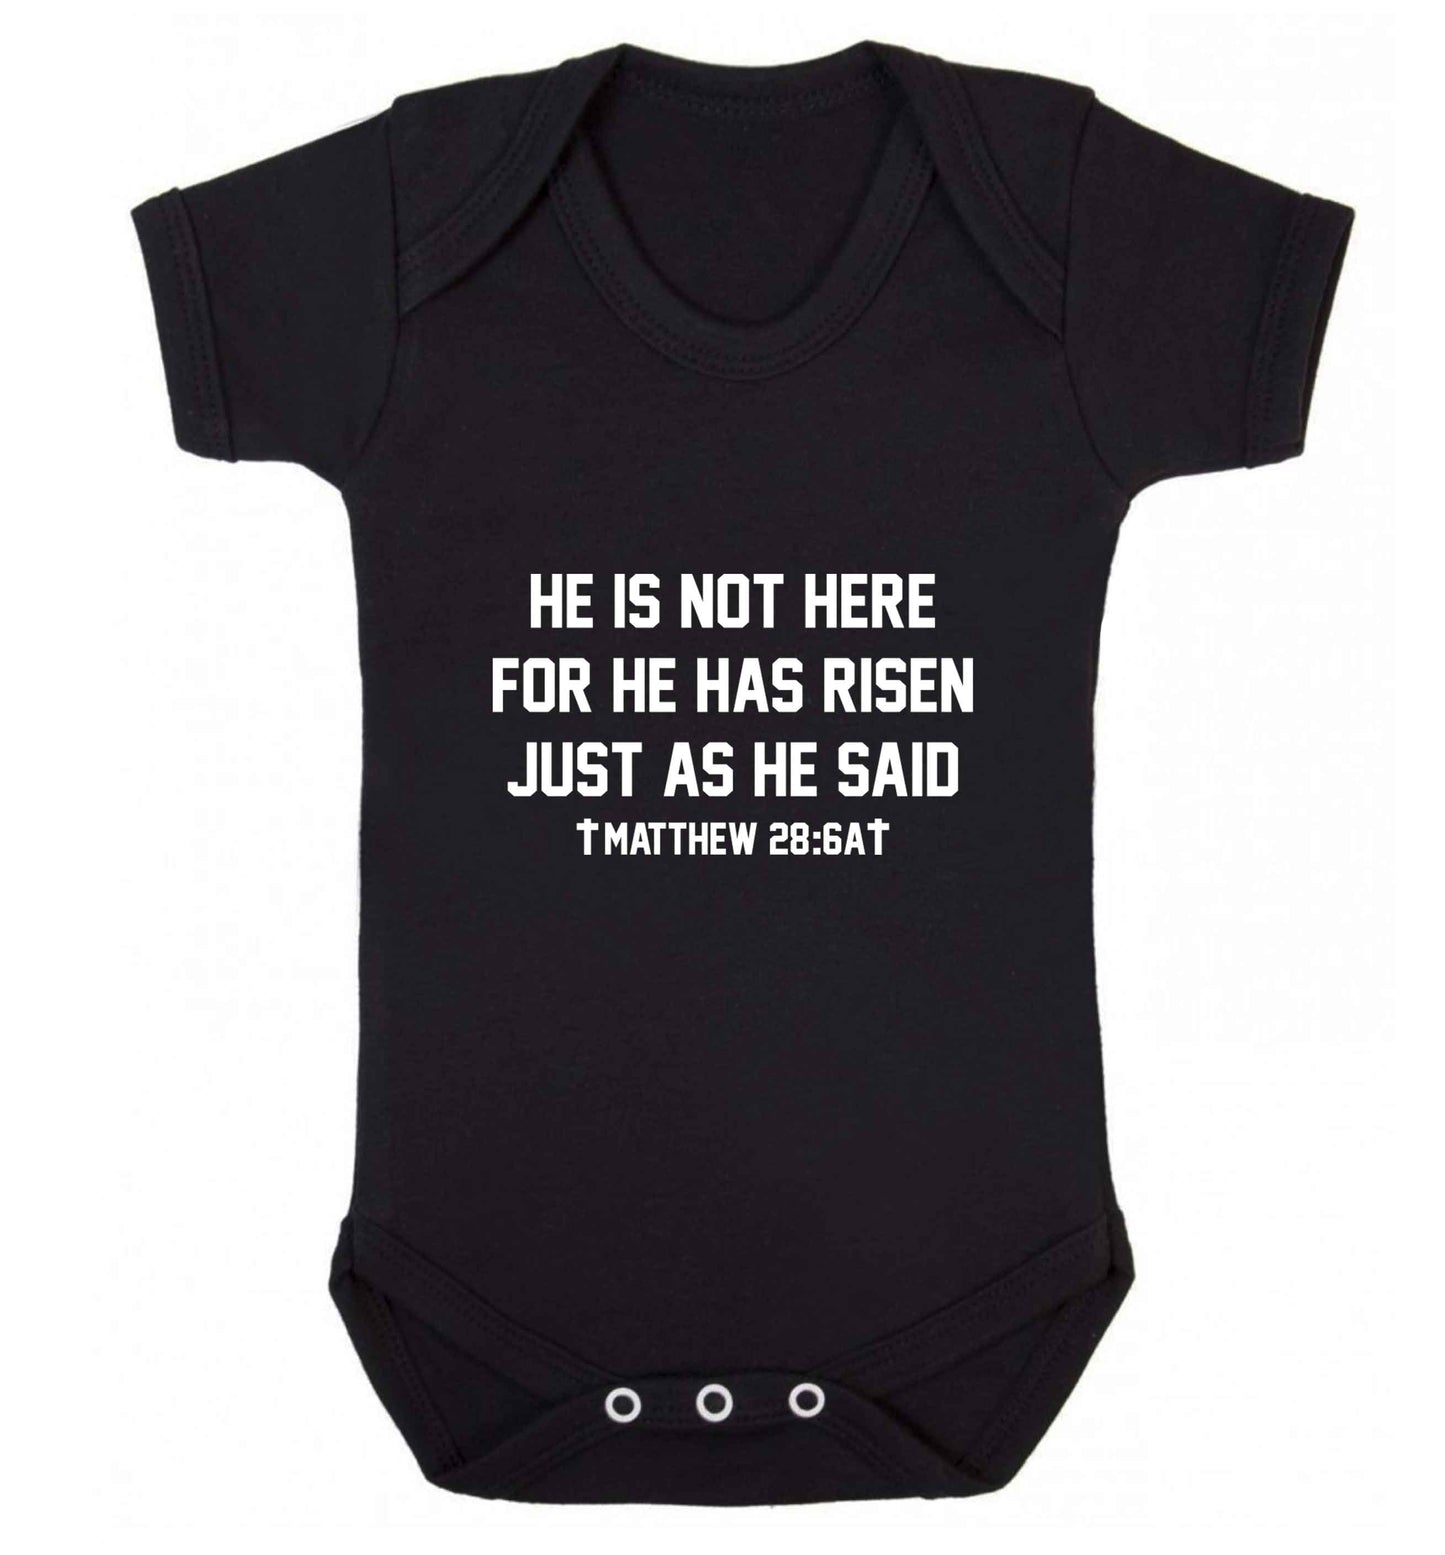 He is not here for he has risen just as he said matthew 28:6A baby vest black 18-24 months